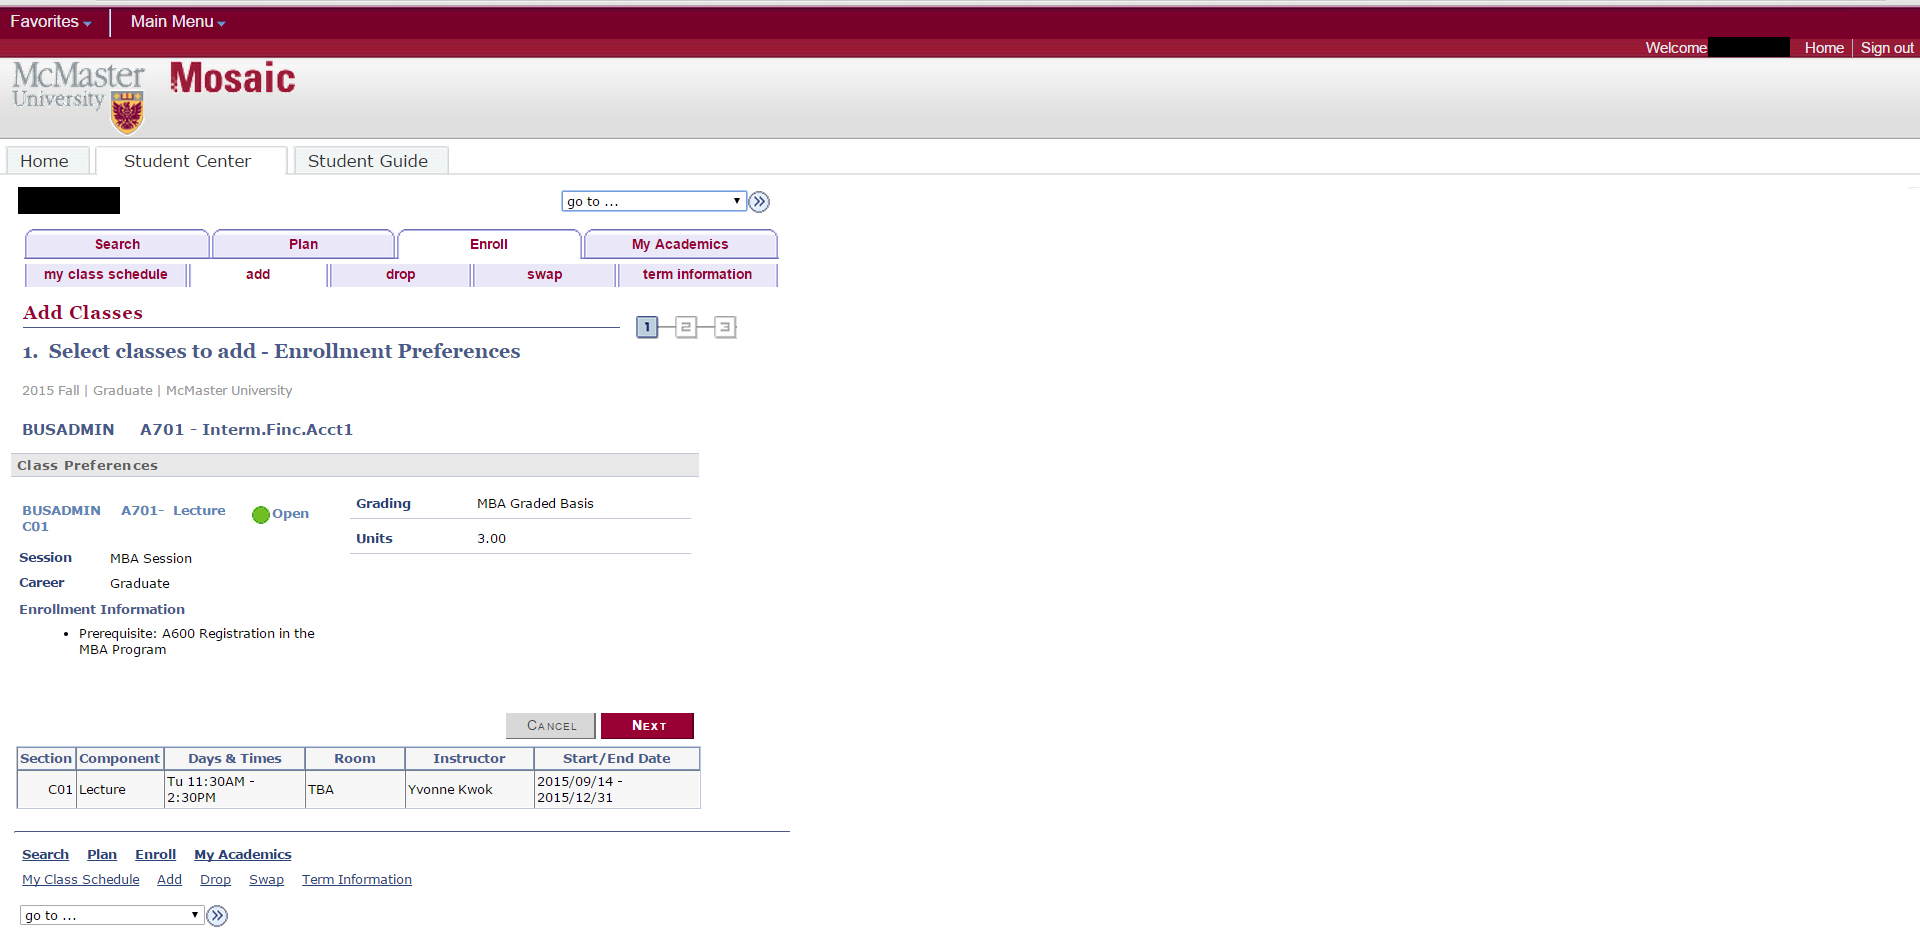 Screenshot of the "add classes" page. Shows an "enrollment preferences" view. There is a "next" button near the bottom of a section showing class preferences.